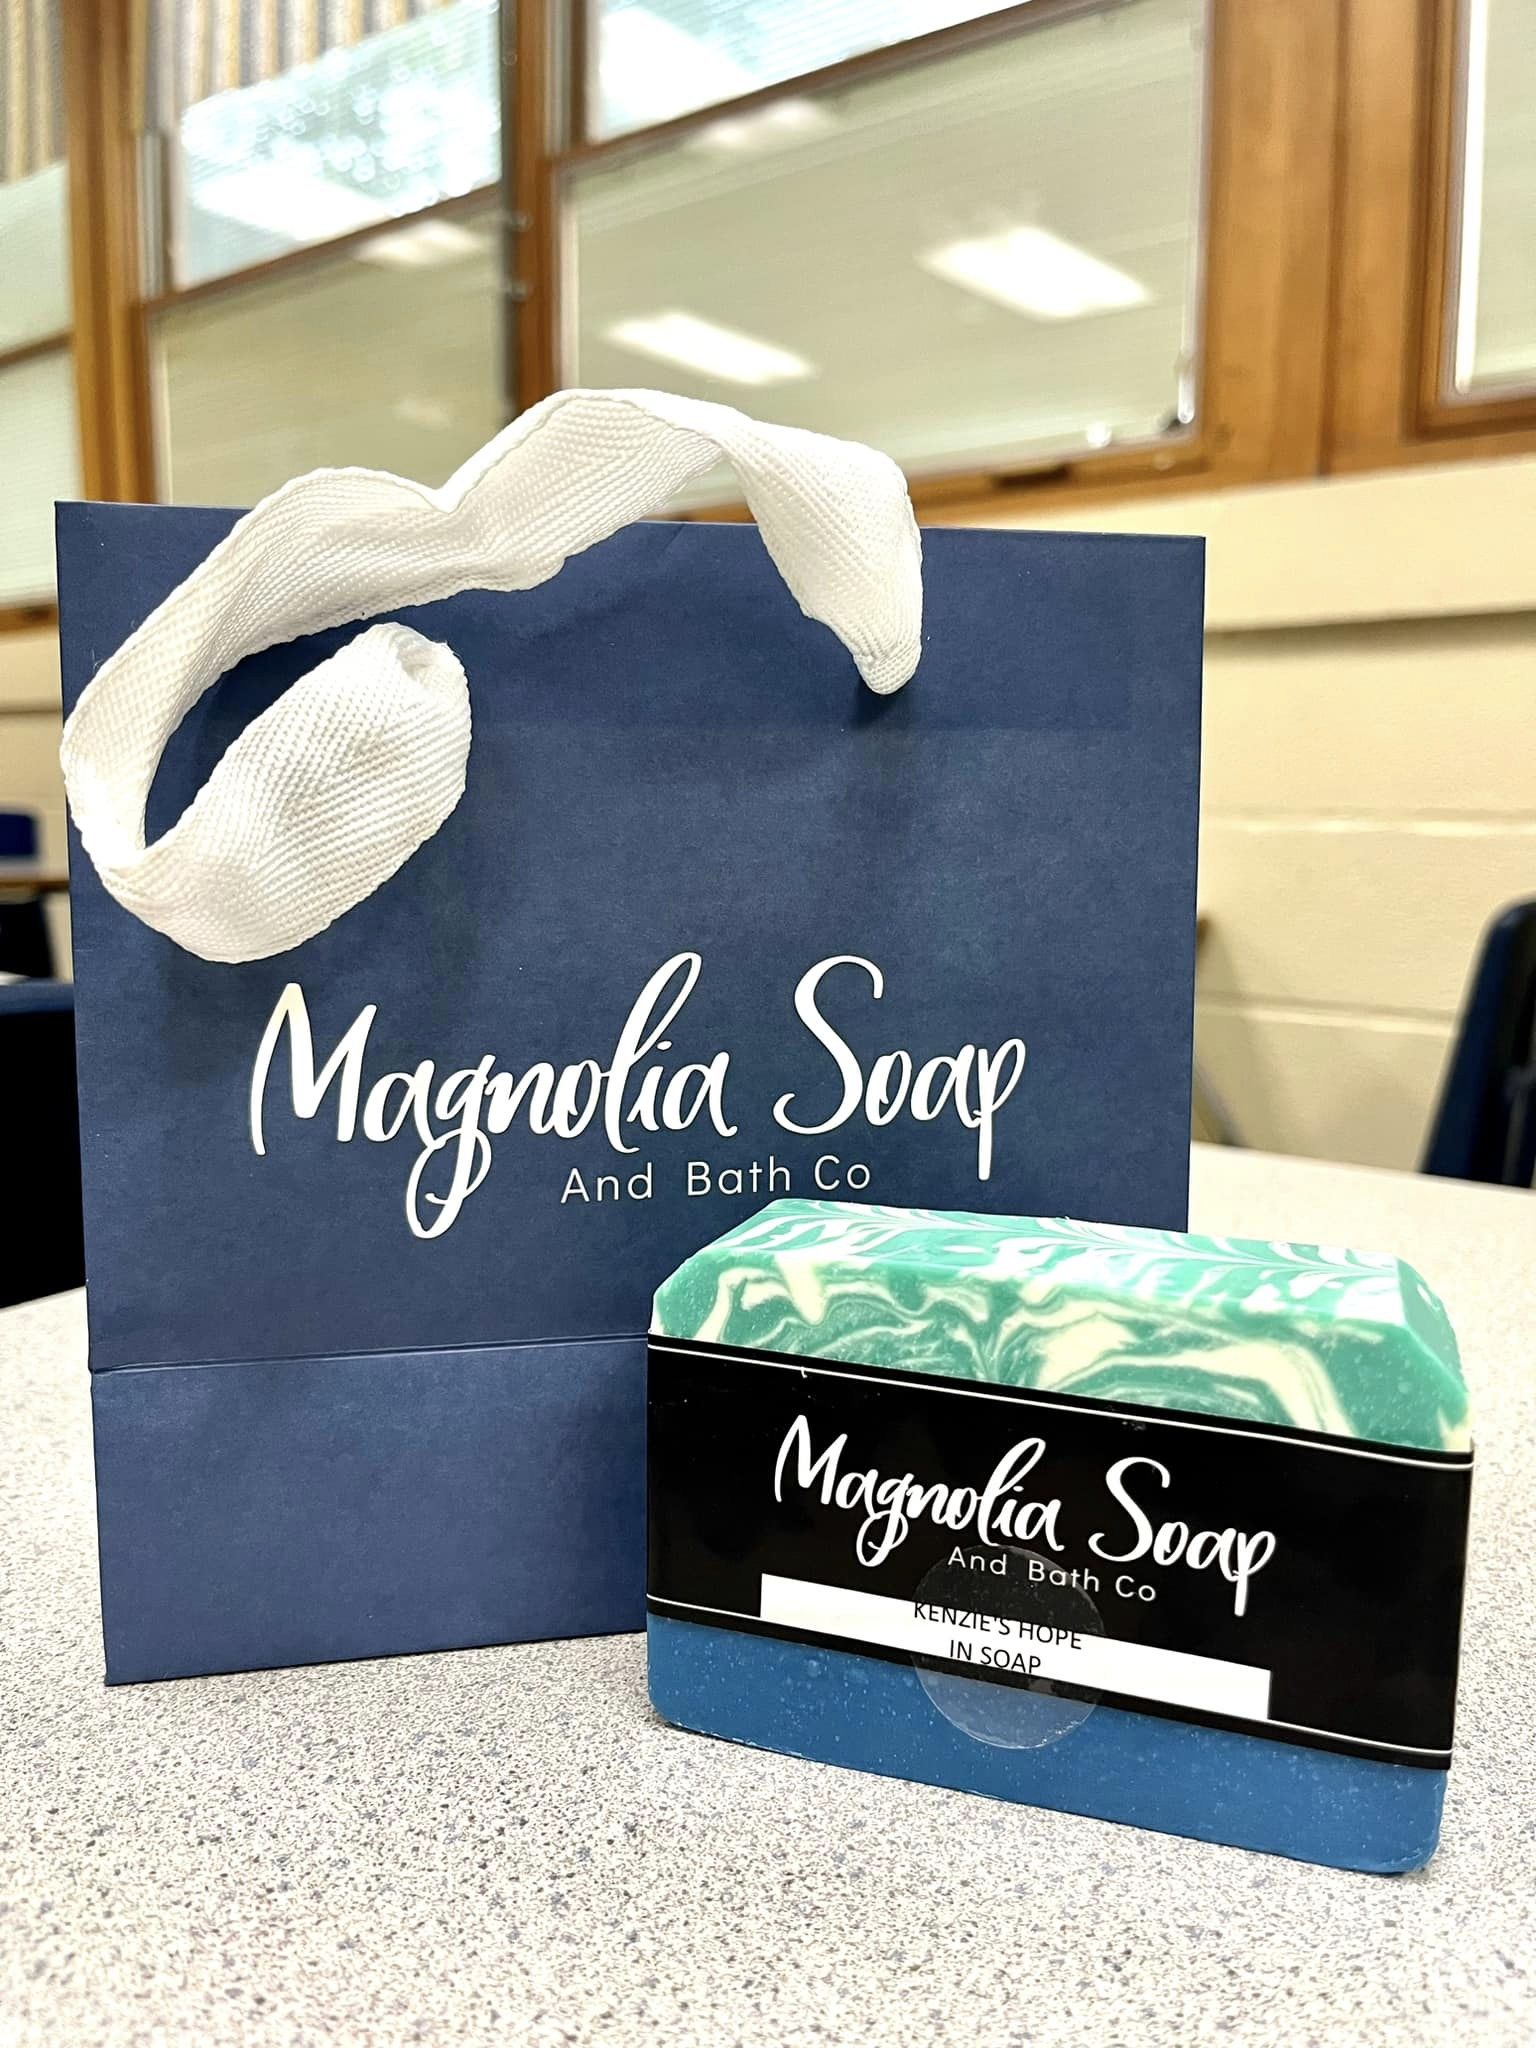 Kenzie's Hope in Soap from Magnolia Soap & Bath Co